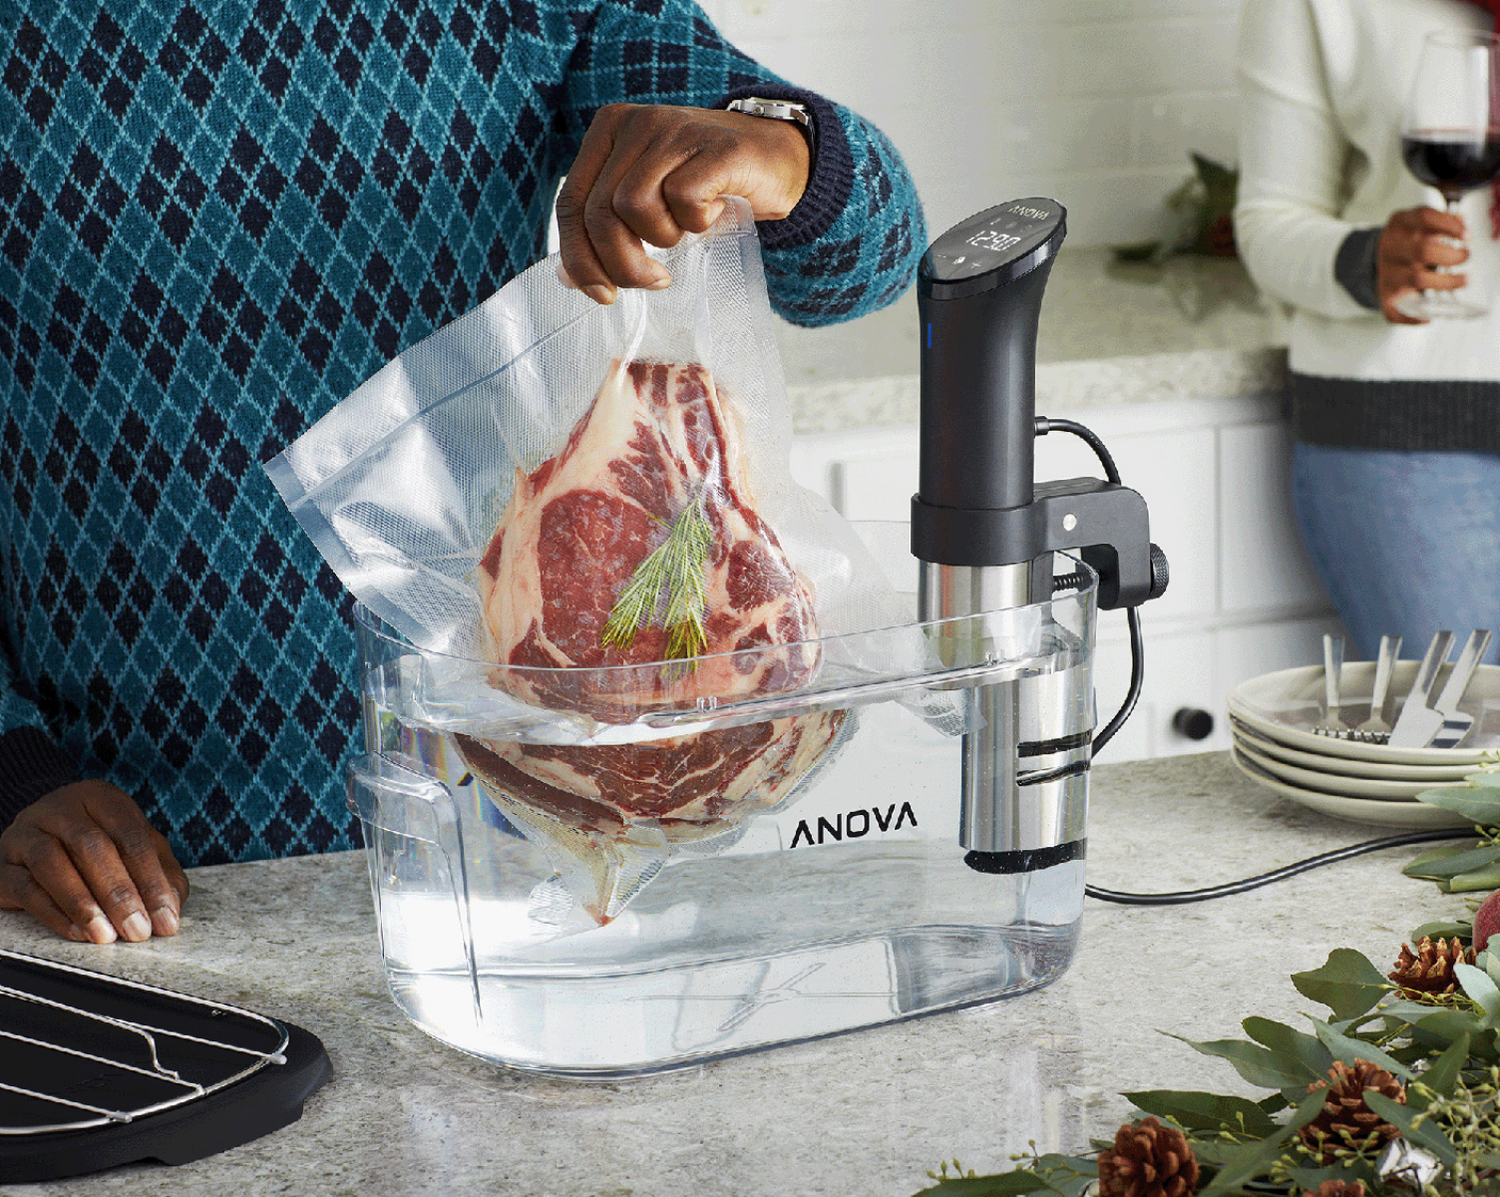 Air Sous Vide: The Latest Must-Have Oven Feature